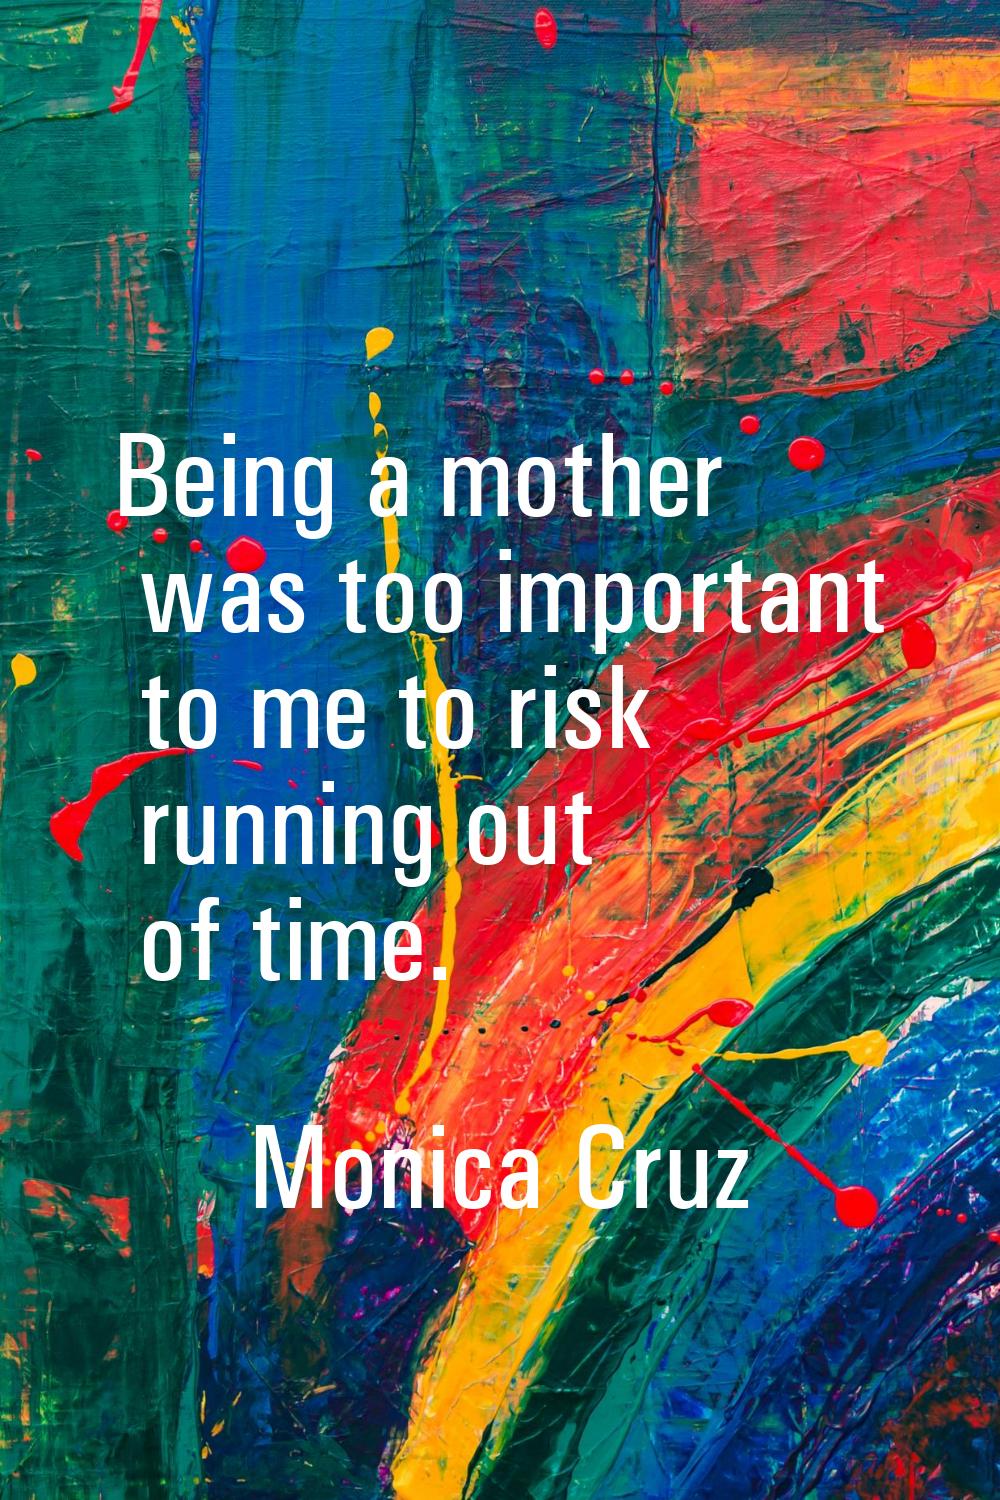 Being a mother was too important to me to risk running out of time.